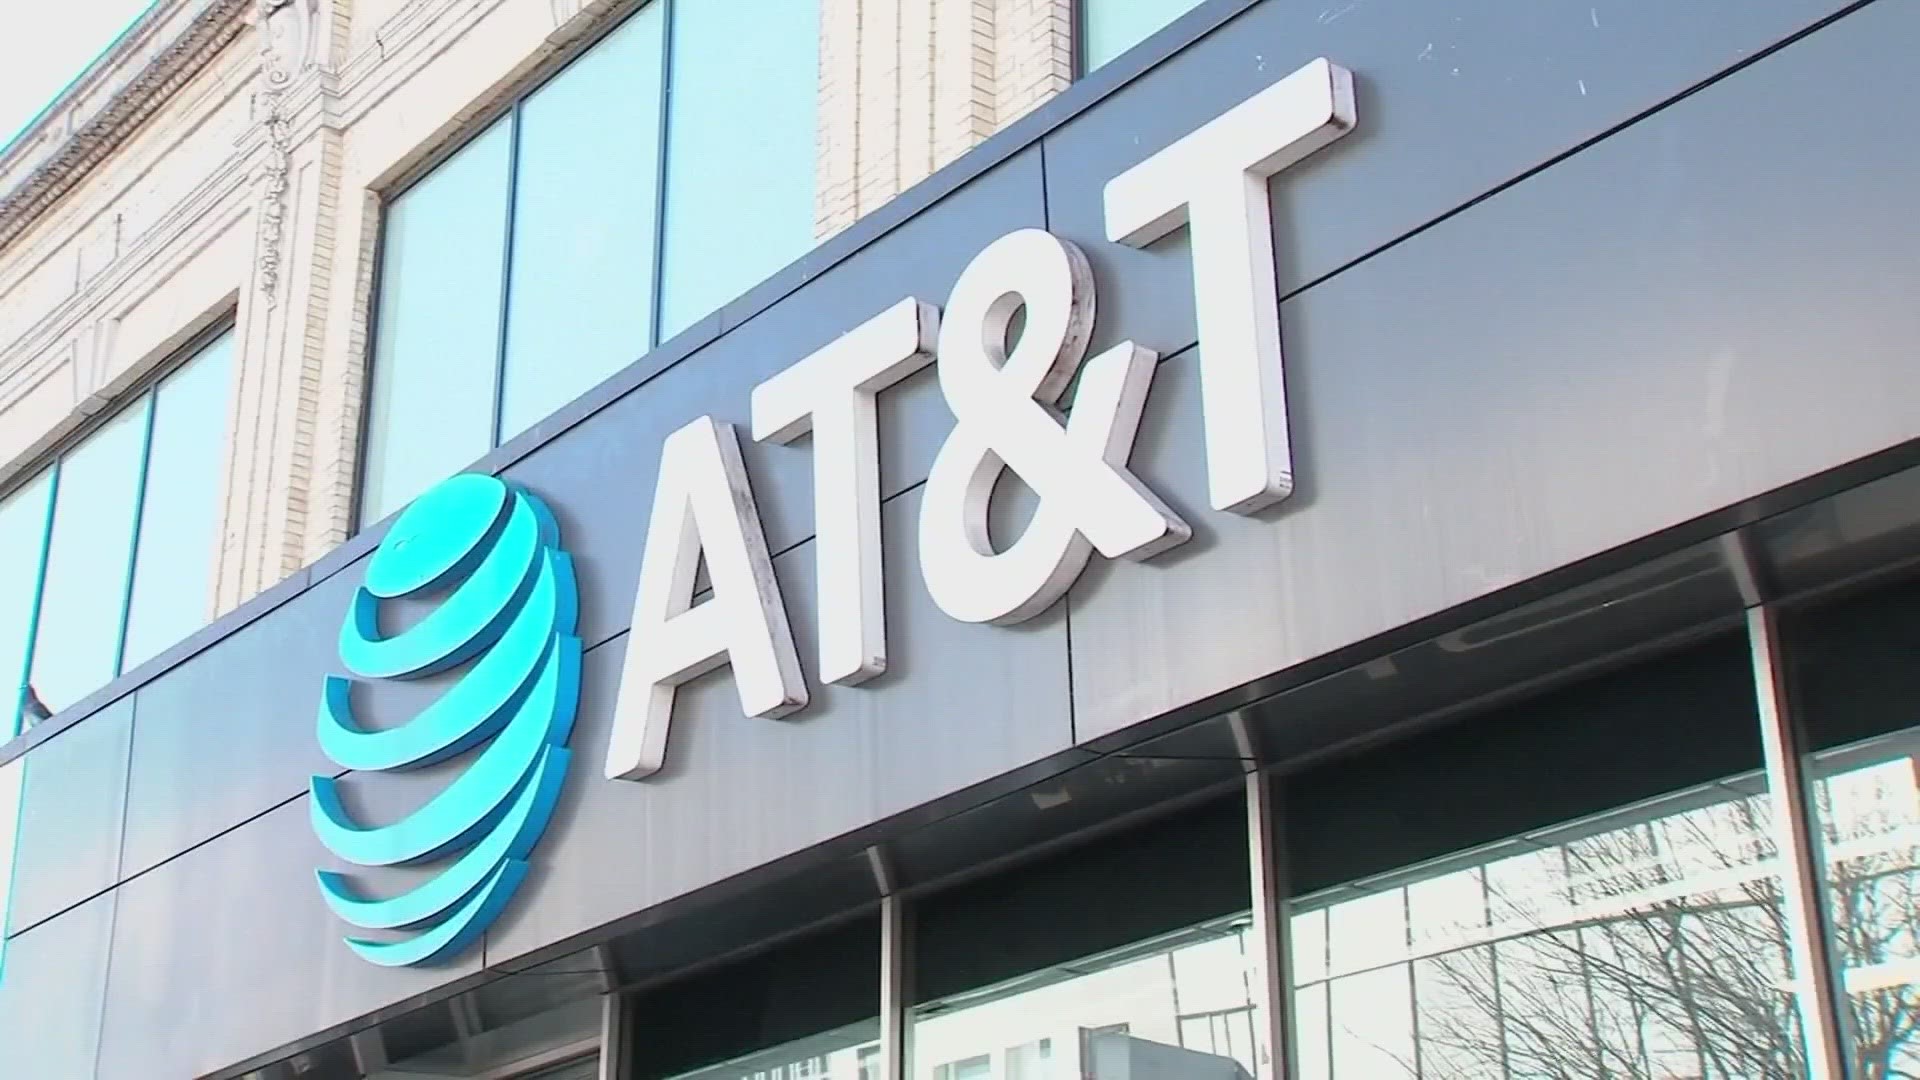 The Federal Trade Commission sued the wireless carrier for slowing down service for some customers with unlimited plans.